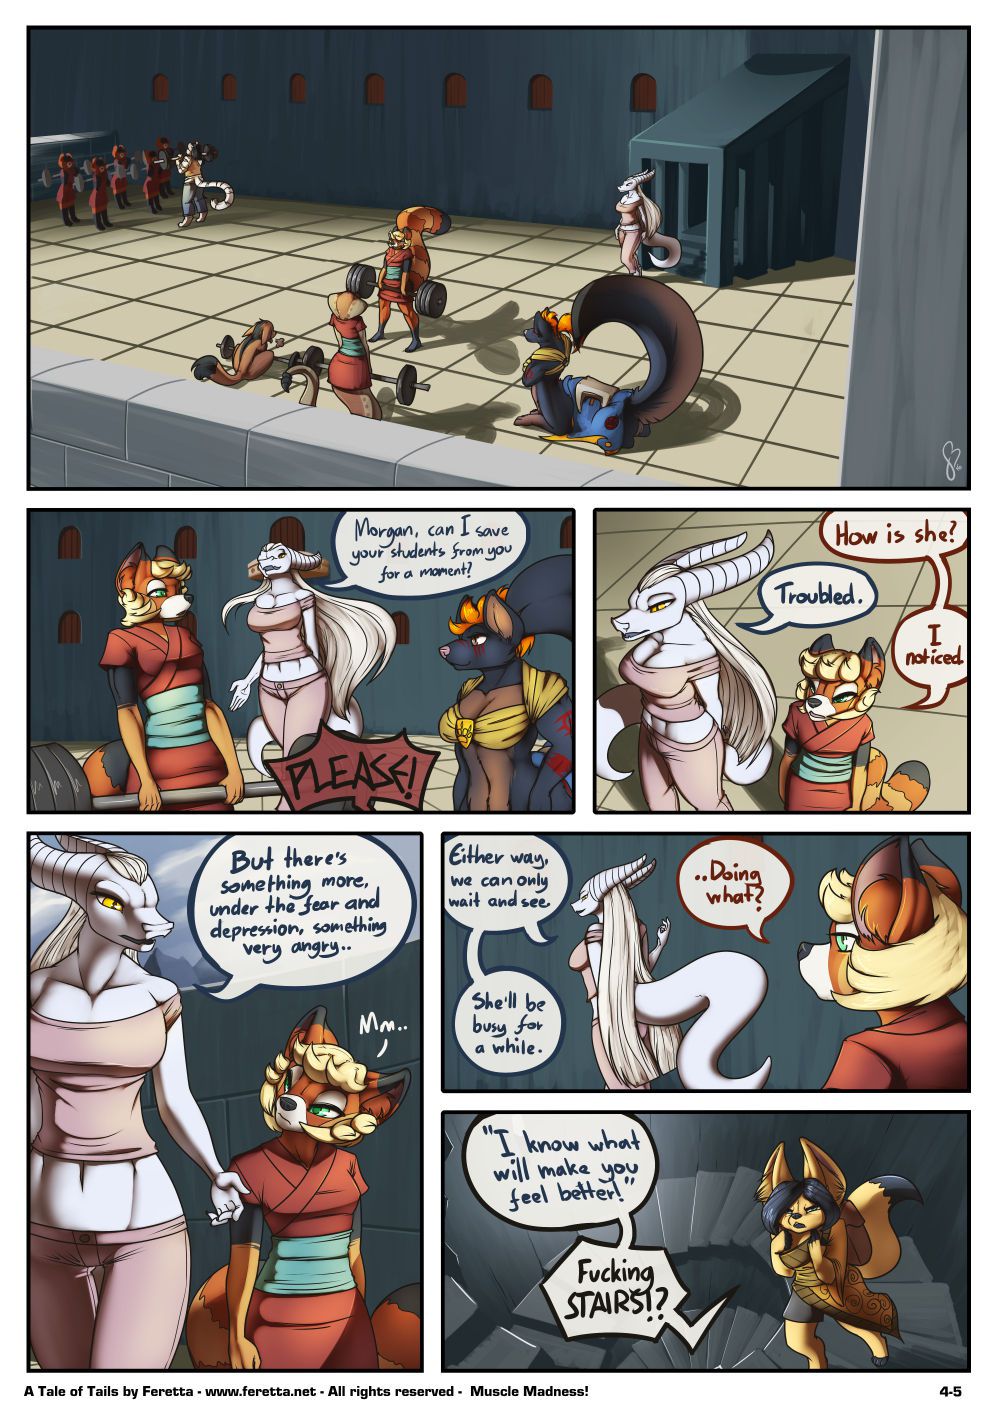 [Feretta] A Tale of Tails: Chapter 4 -  Matters of the mind [Ongoing] 5